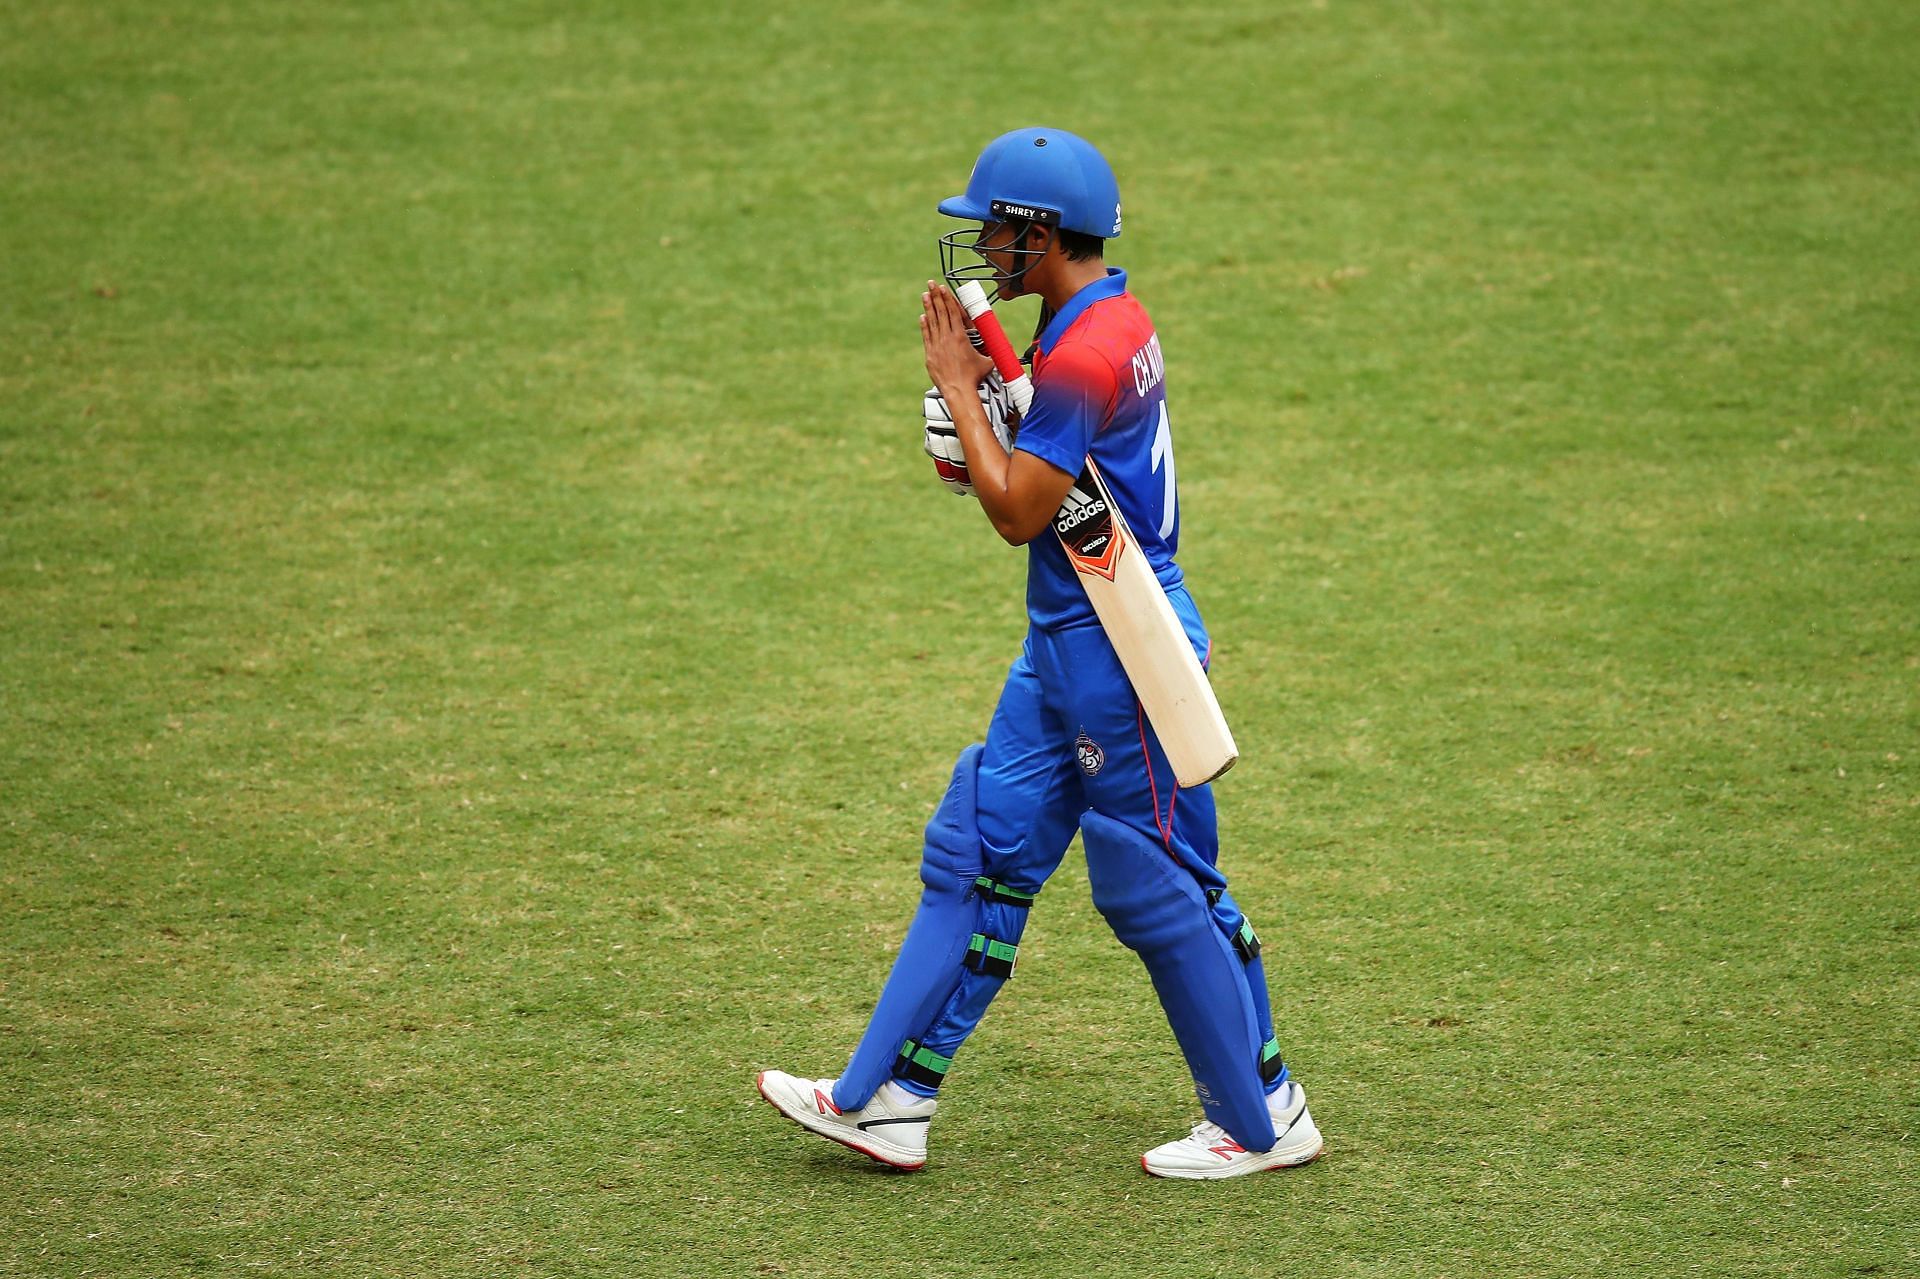 Natthakan Chantham was impressive with the bat in the second ODI